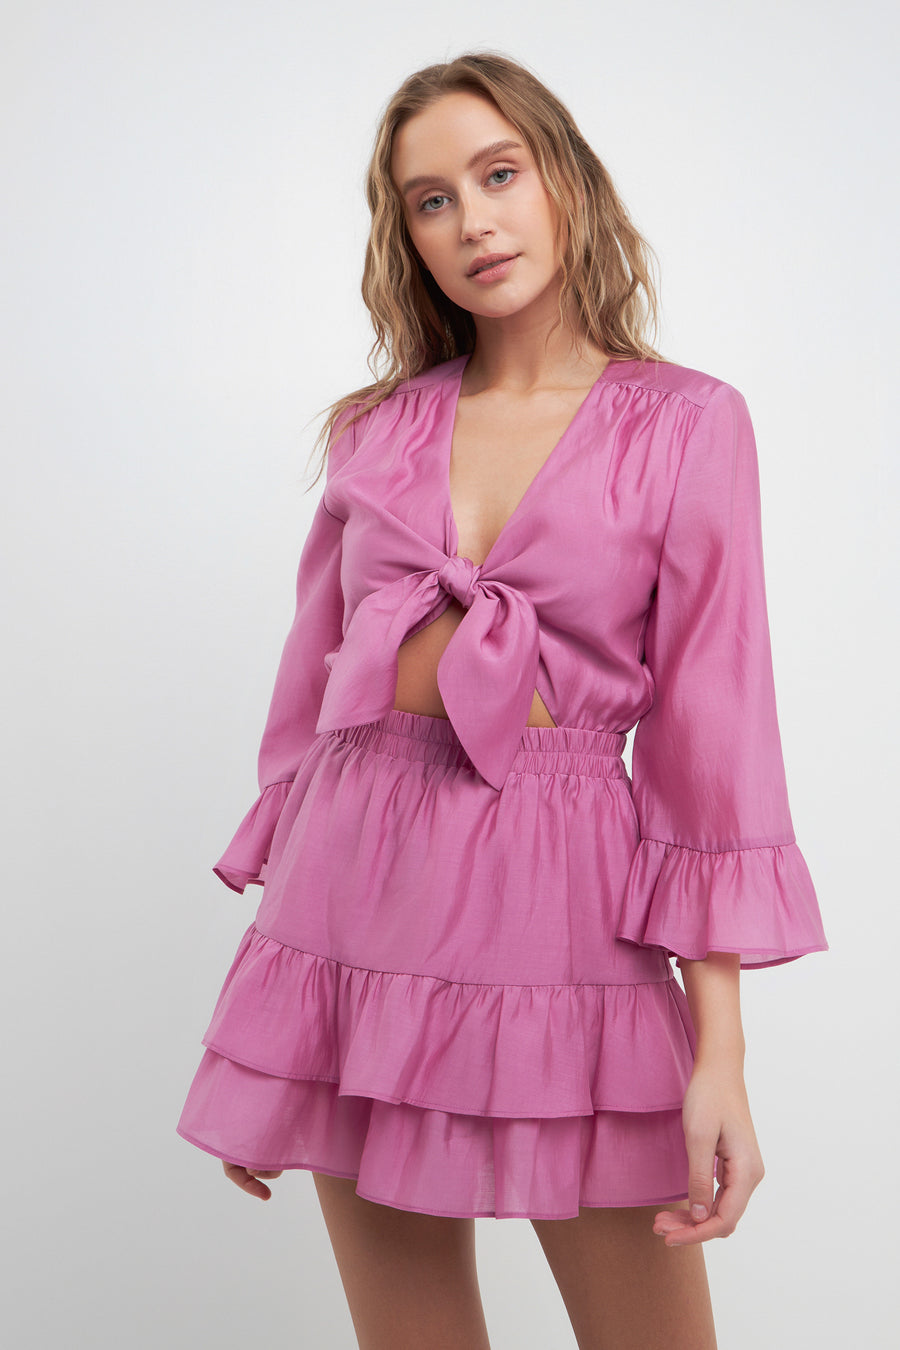 Ruffle and Front Tie Detail Romper